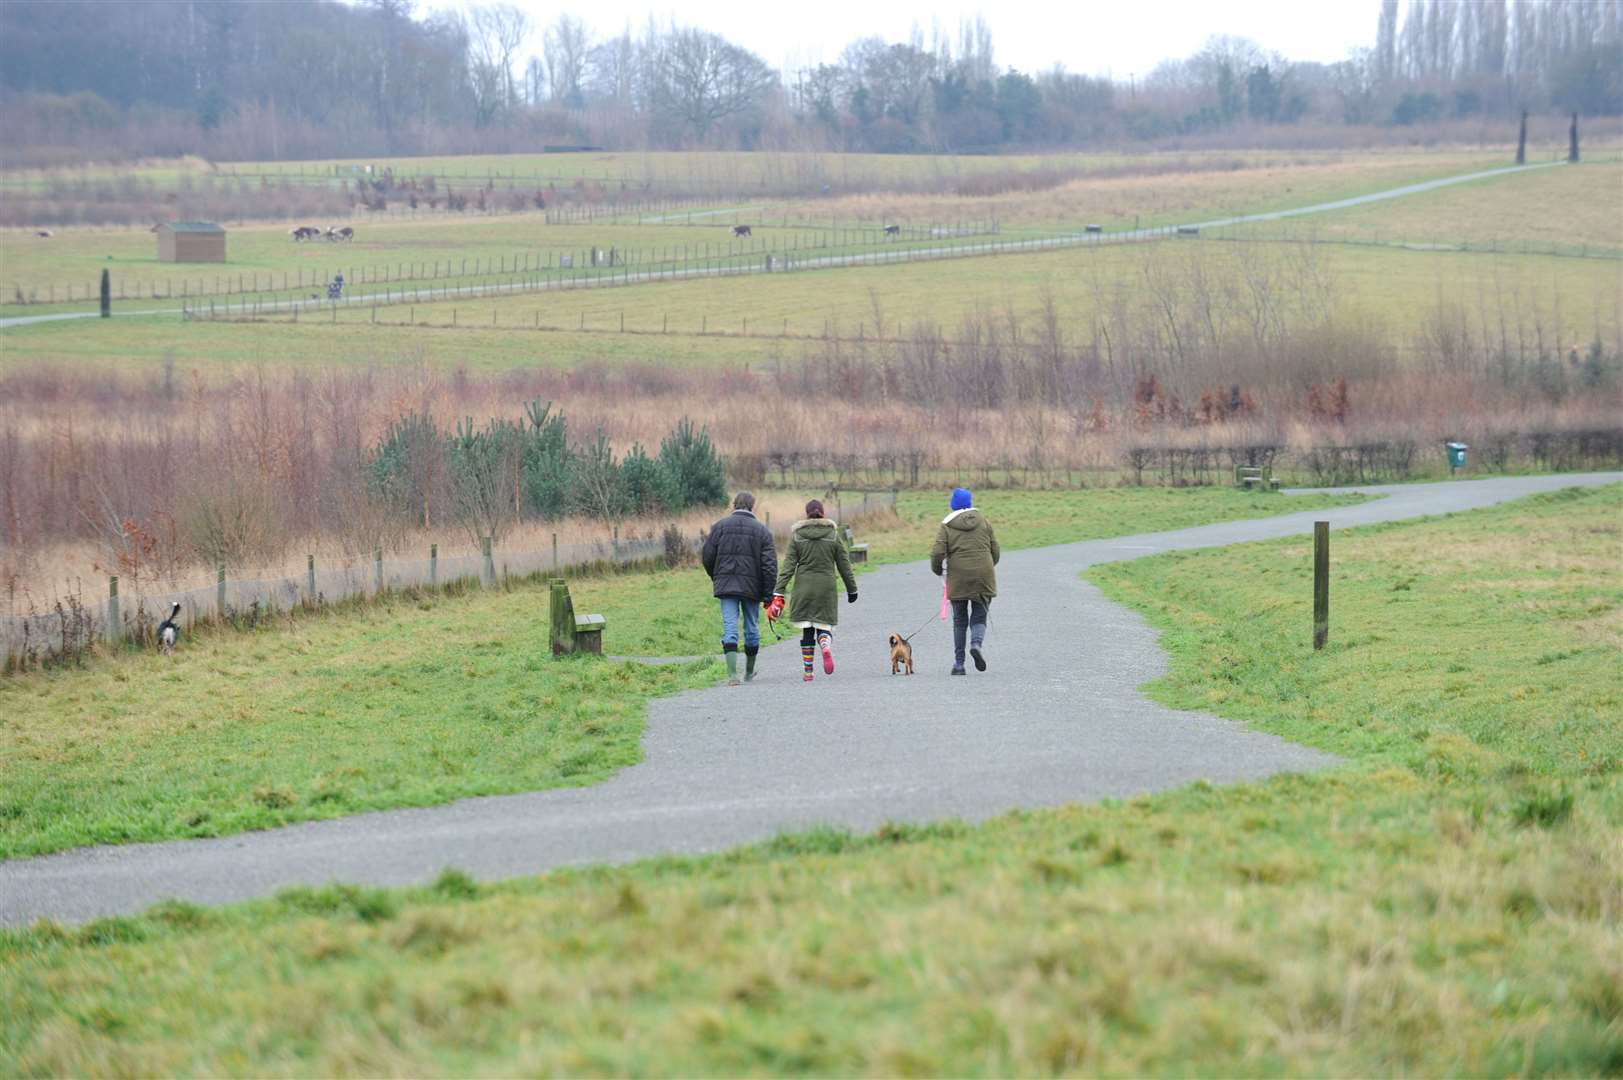 The park is popular with dog walkers